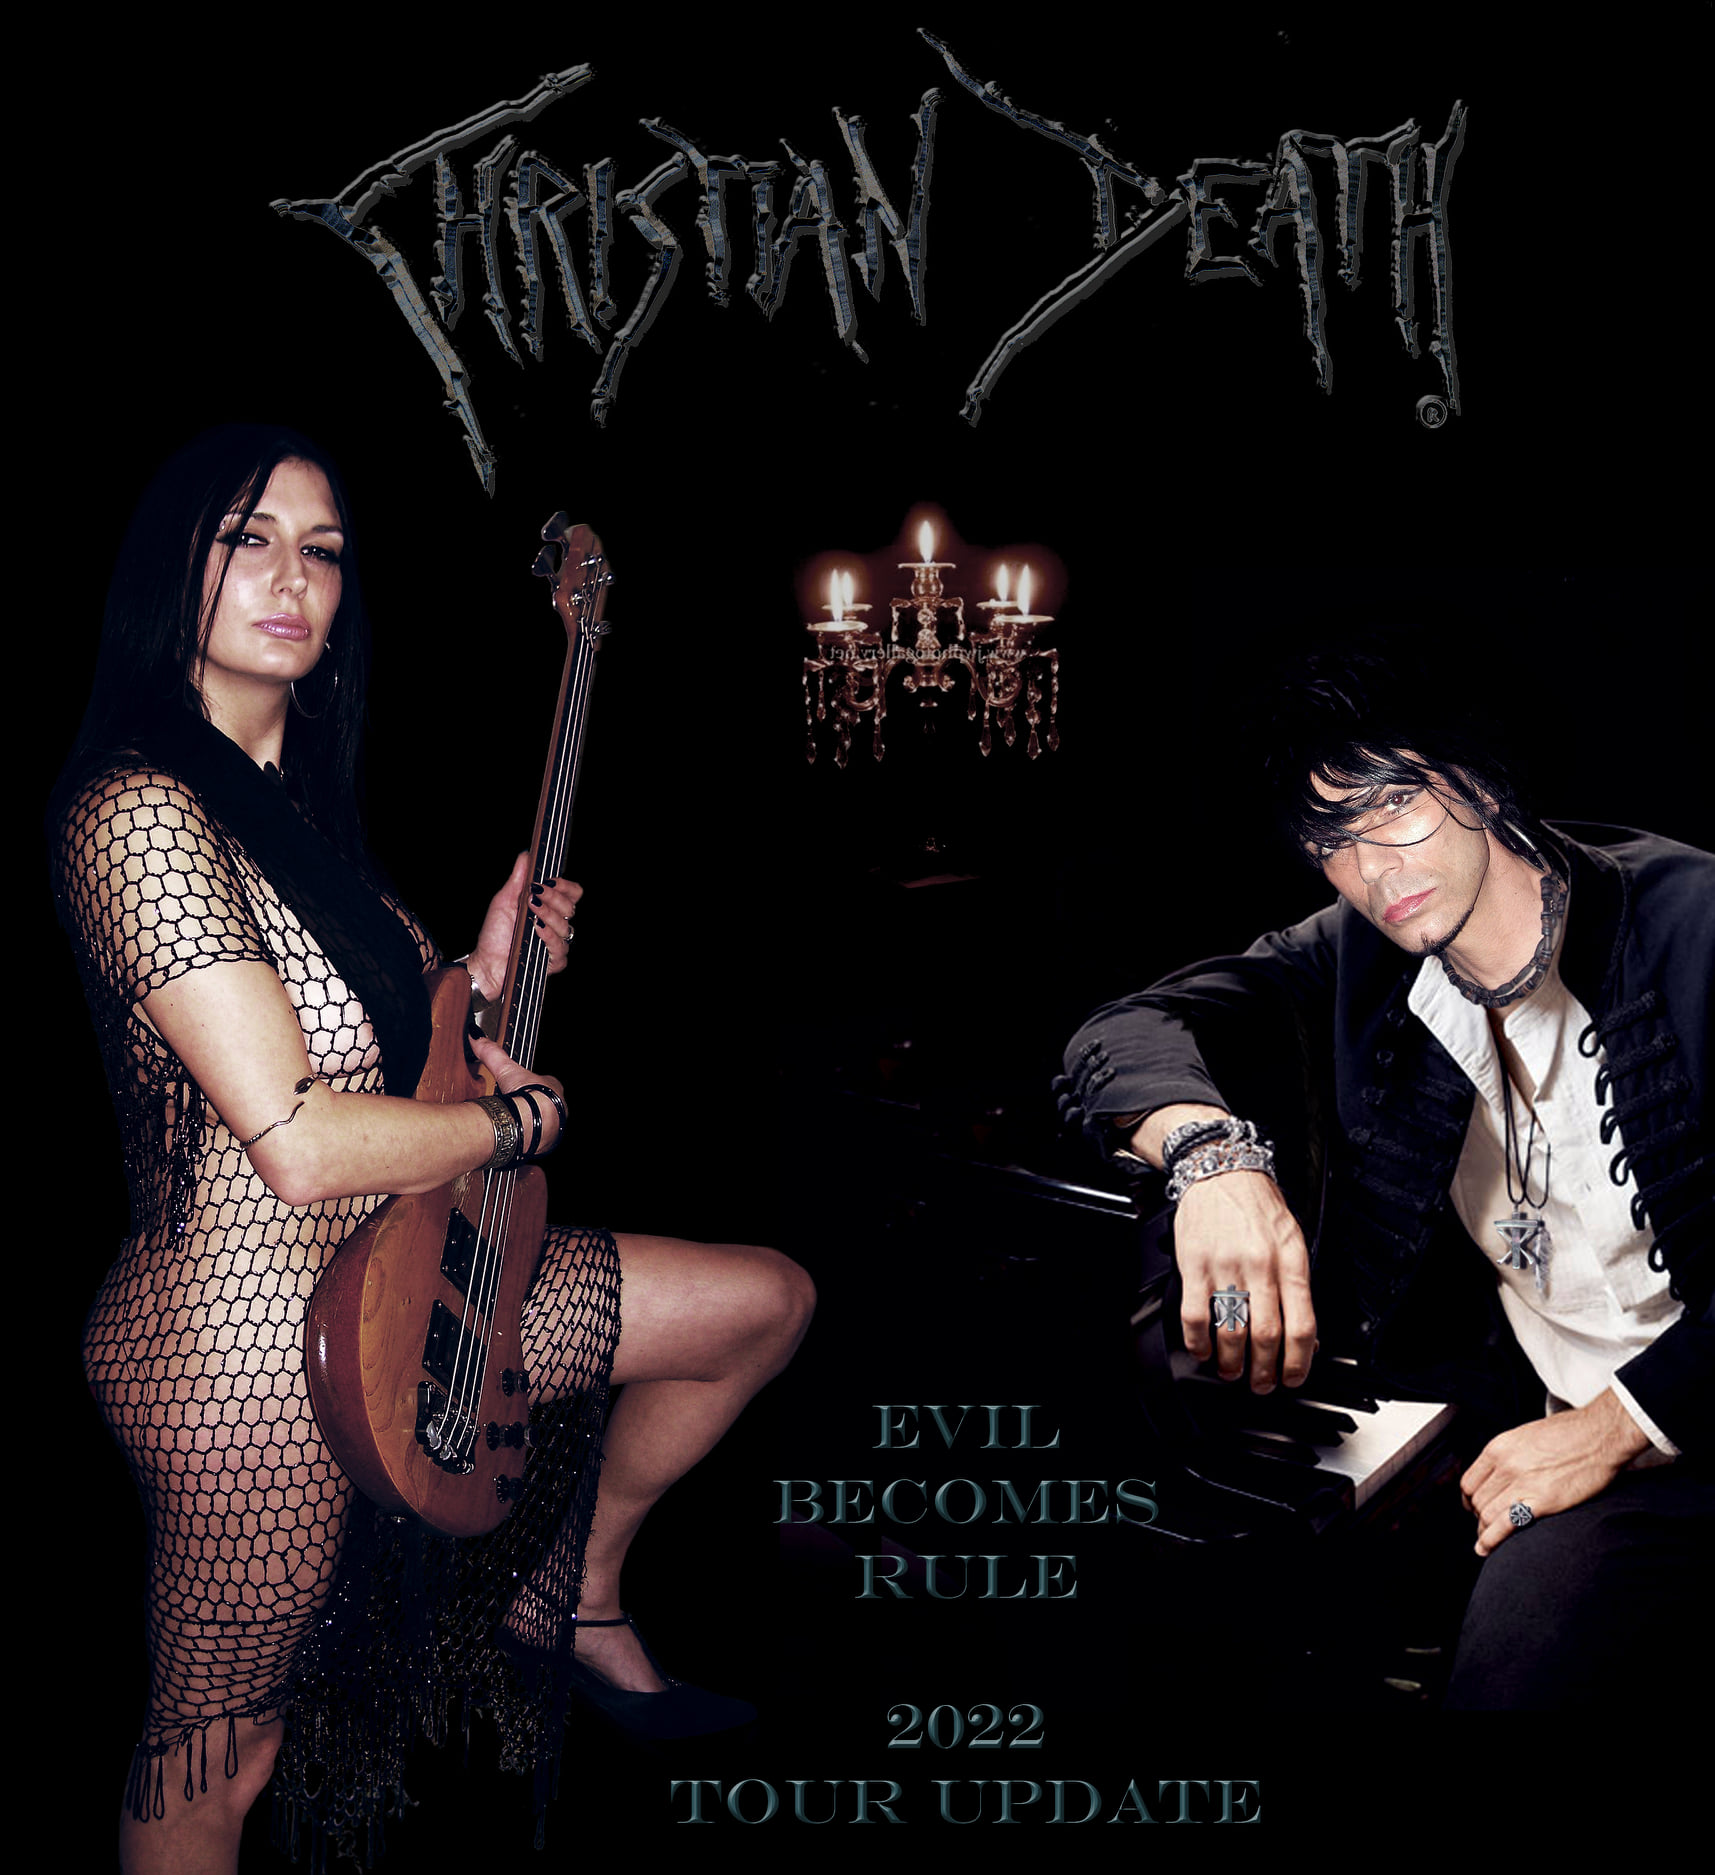 christian death promo with maitri and valor